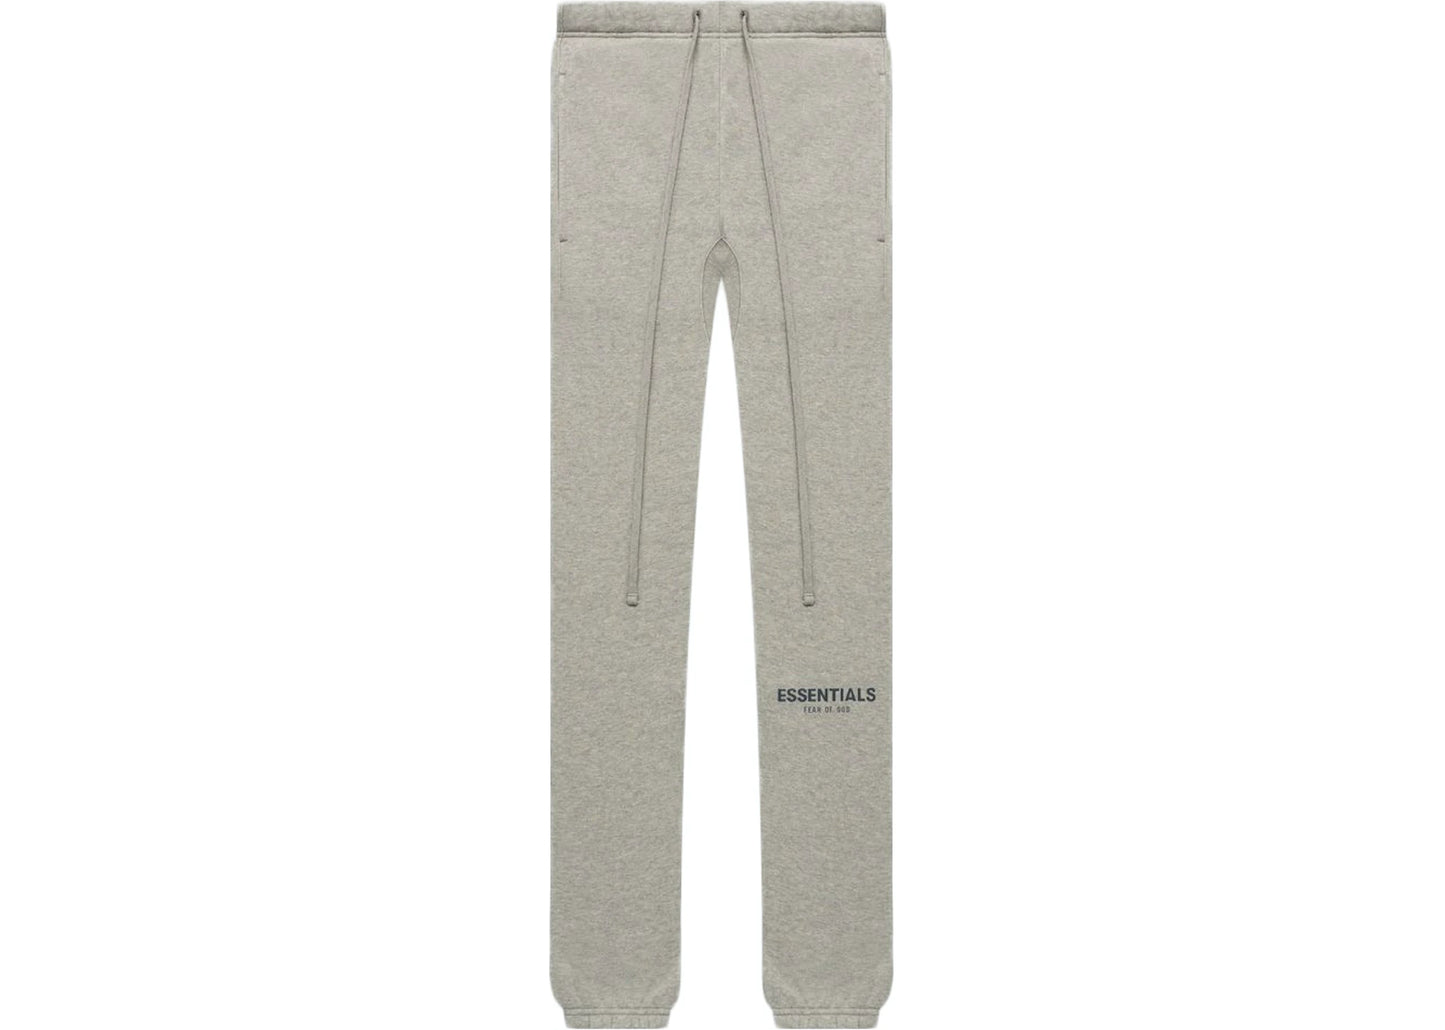 Fear of God Essentials Core Collection Sweatpant Dark Heather Oatmeal